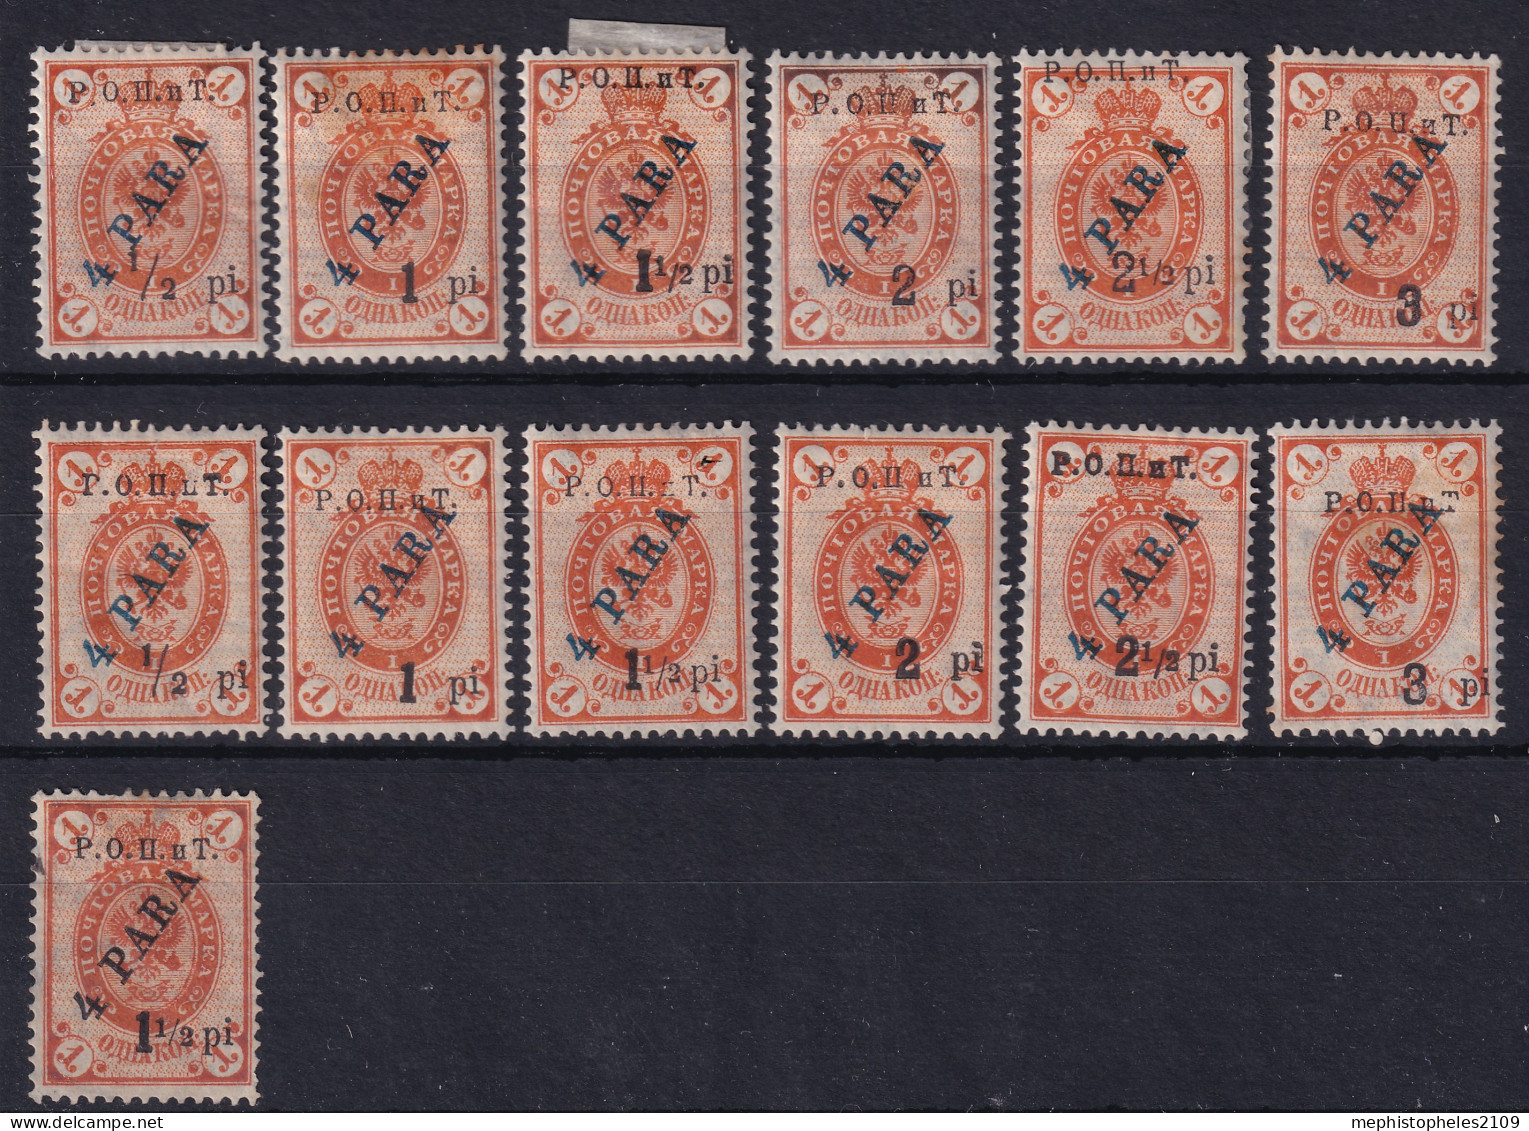 RUSSIAN COMPANY OF NAVIGATION & TRADE 1900 - MLH - 13 Stamps Overprinted - Turkish Empire